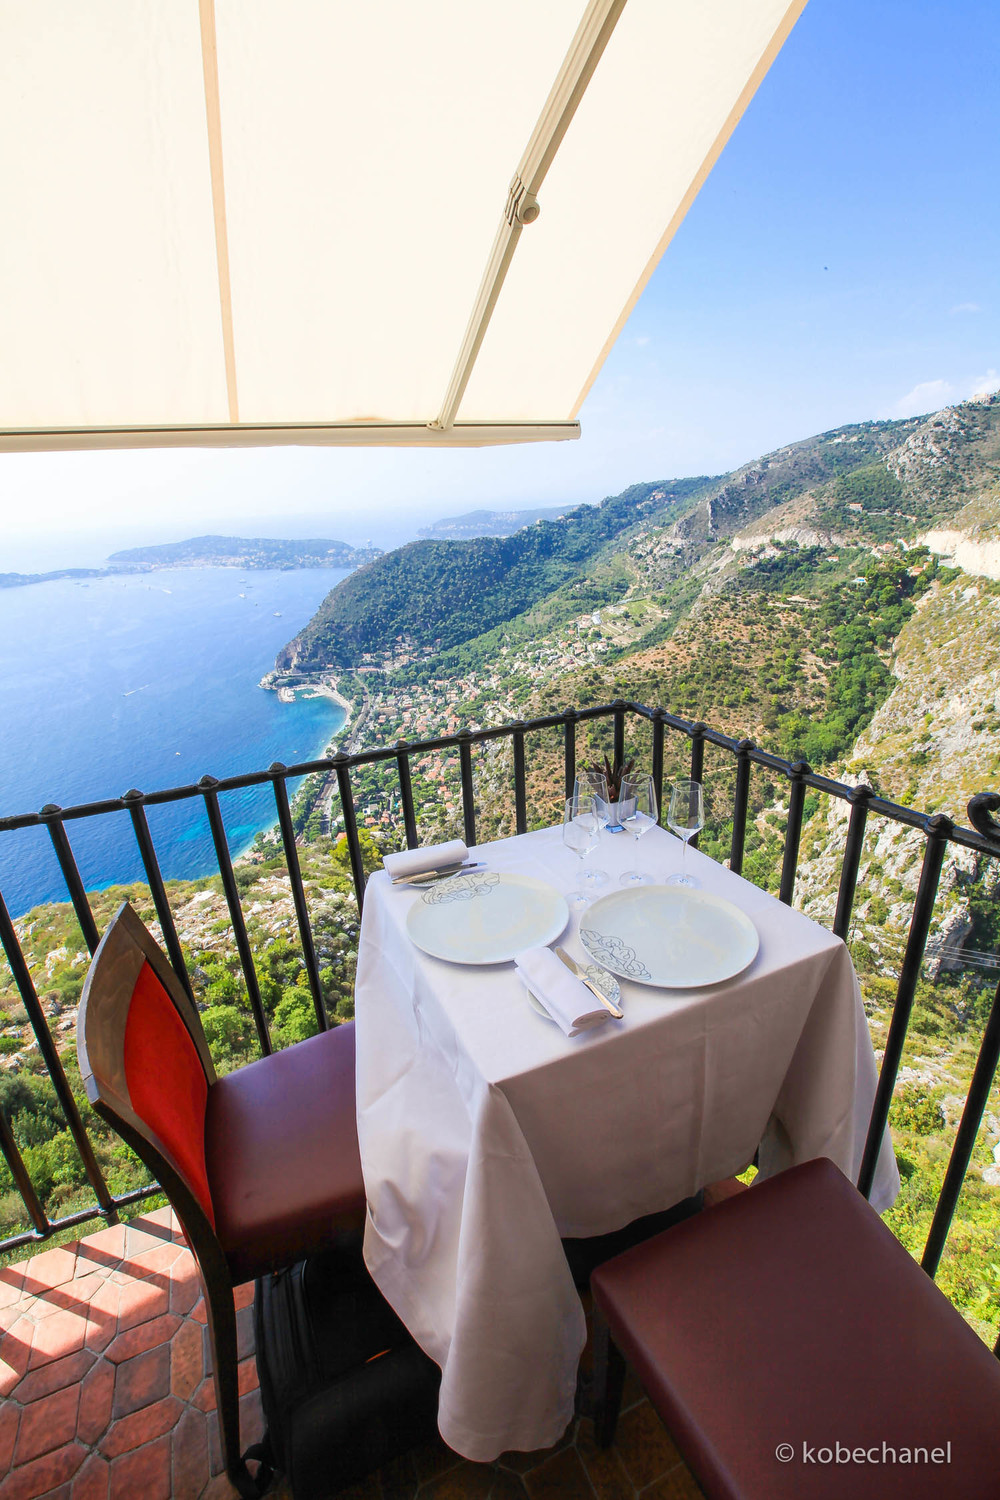 Lunch at Chateau Eza, a Michelin-starred restaurant in the French Riviera